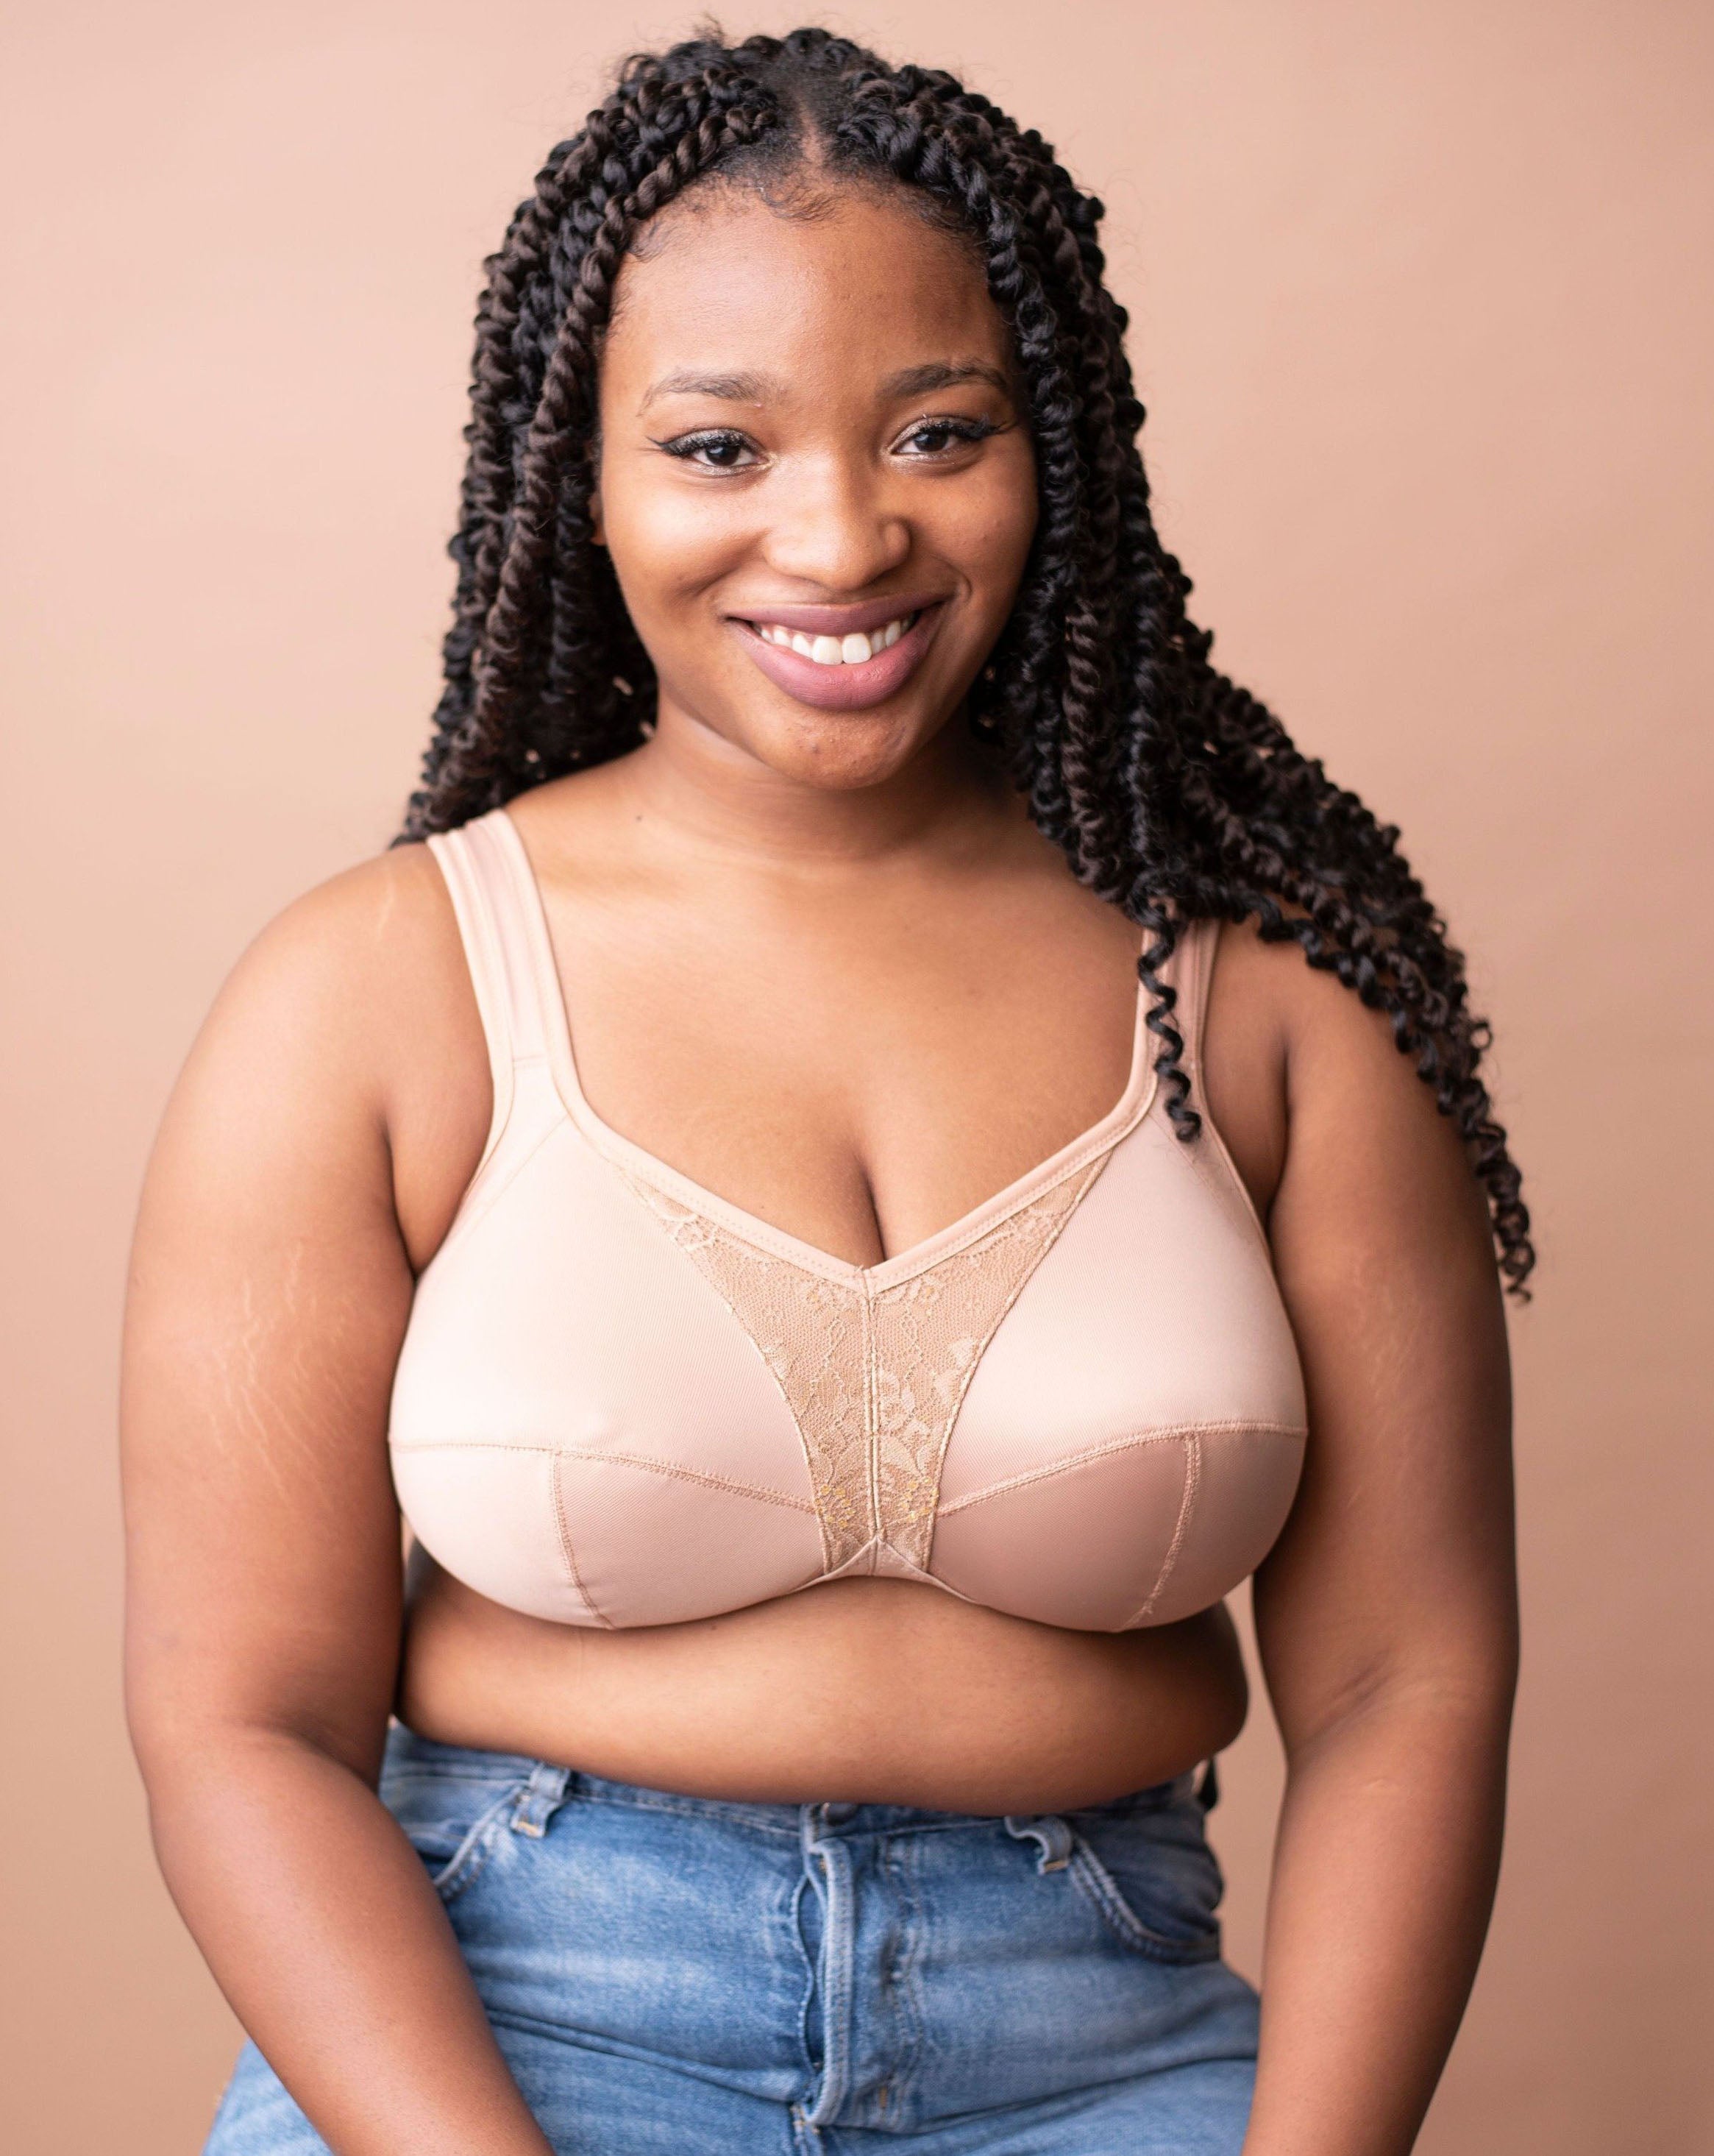 Lia from Rubies Bras, a female with long braided hair, is wearing a beige maximum solids full coverage bra and blue jeans. Shot on copper backdrop